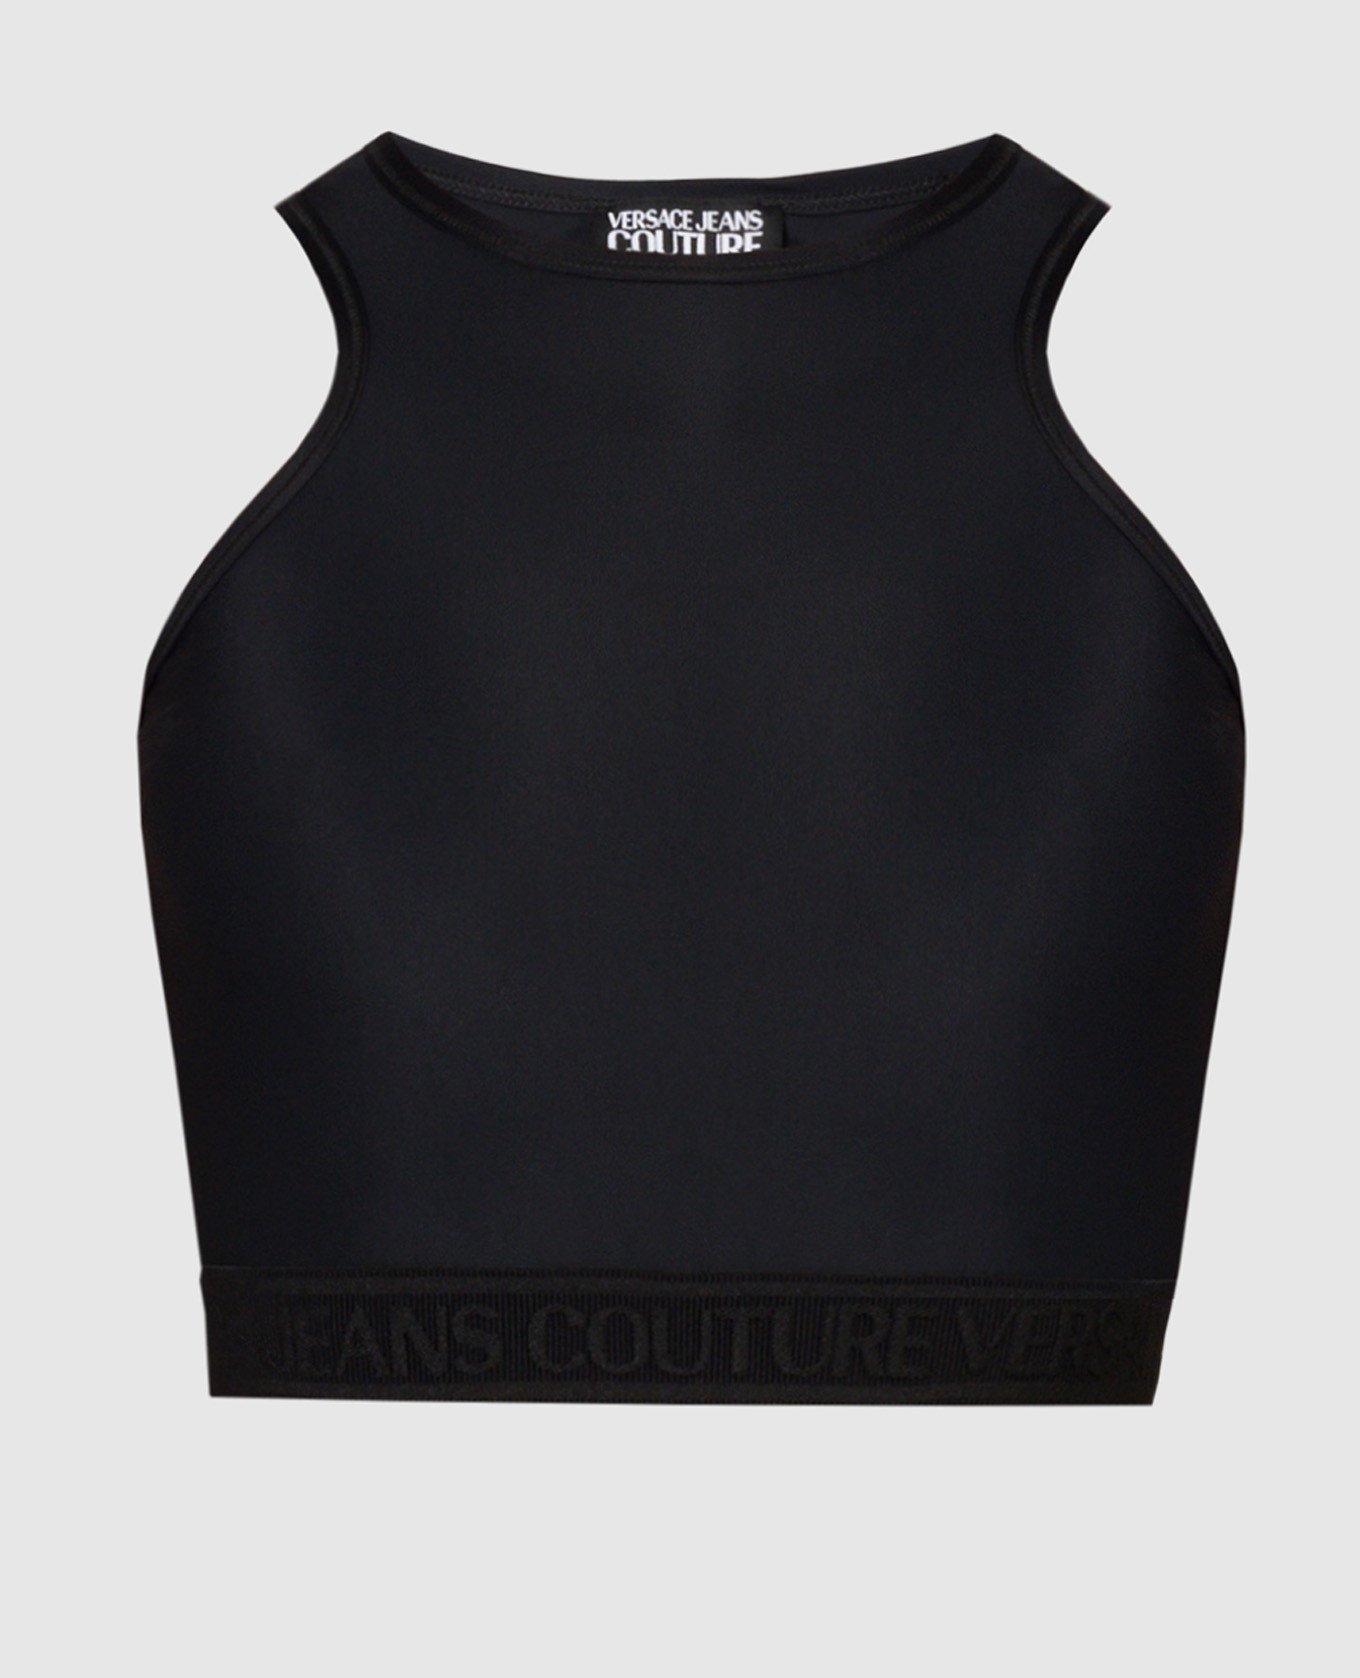 Black top with textured logo